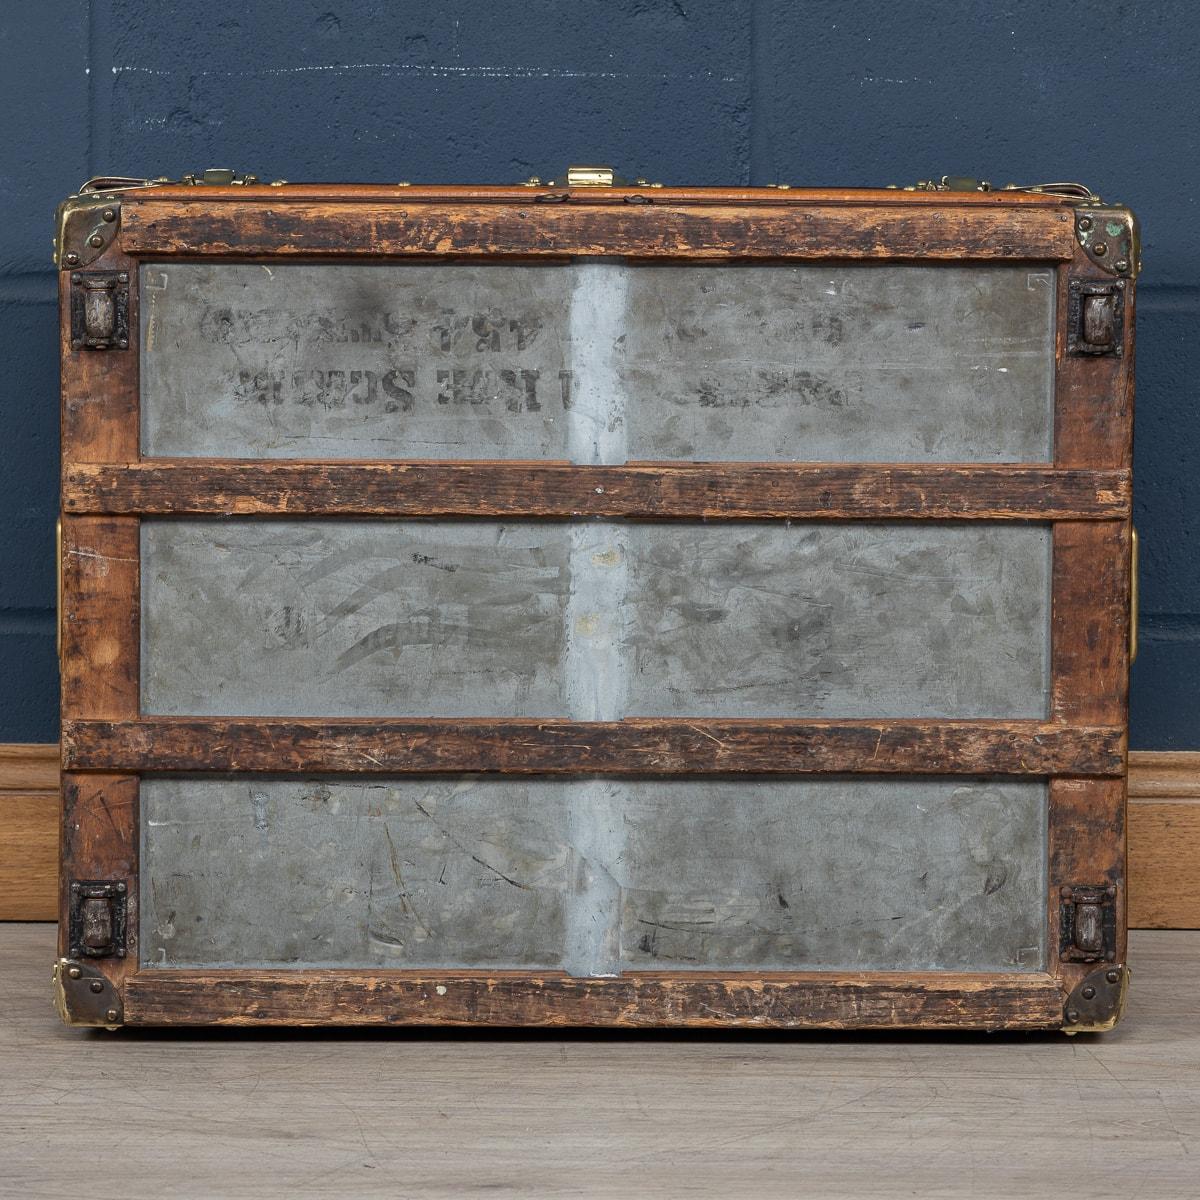 Late 19th Century Rare 19th Century Louis Vuitton Shirt Trunk In Damier Canvas, France c.1895 For Sale